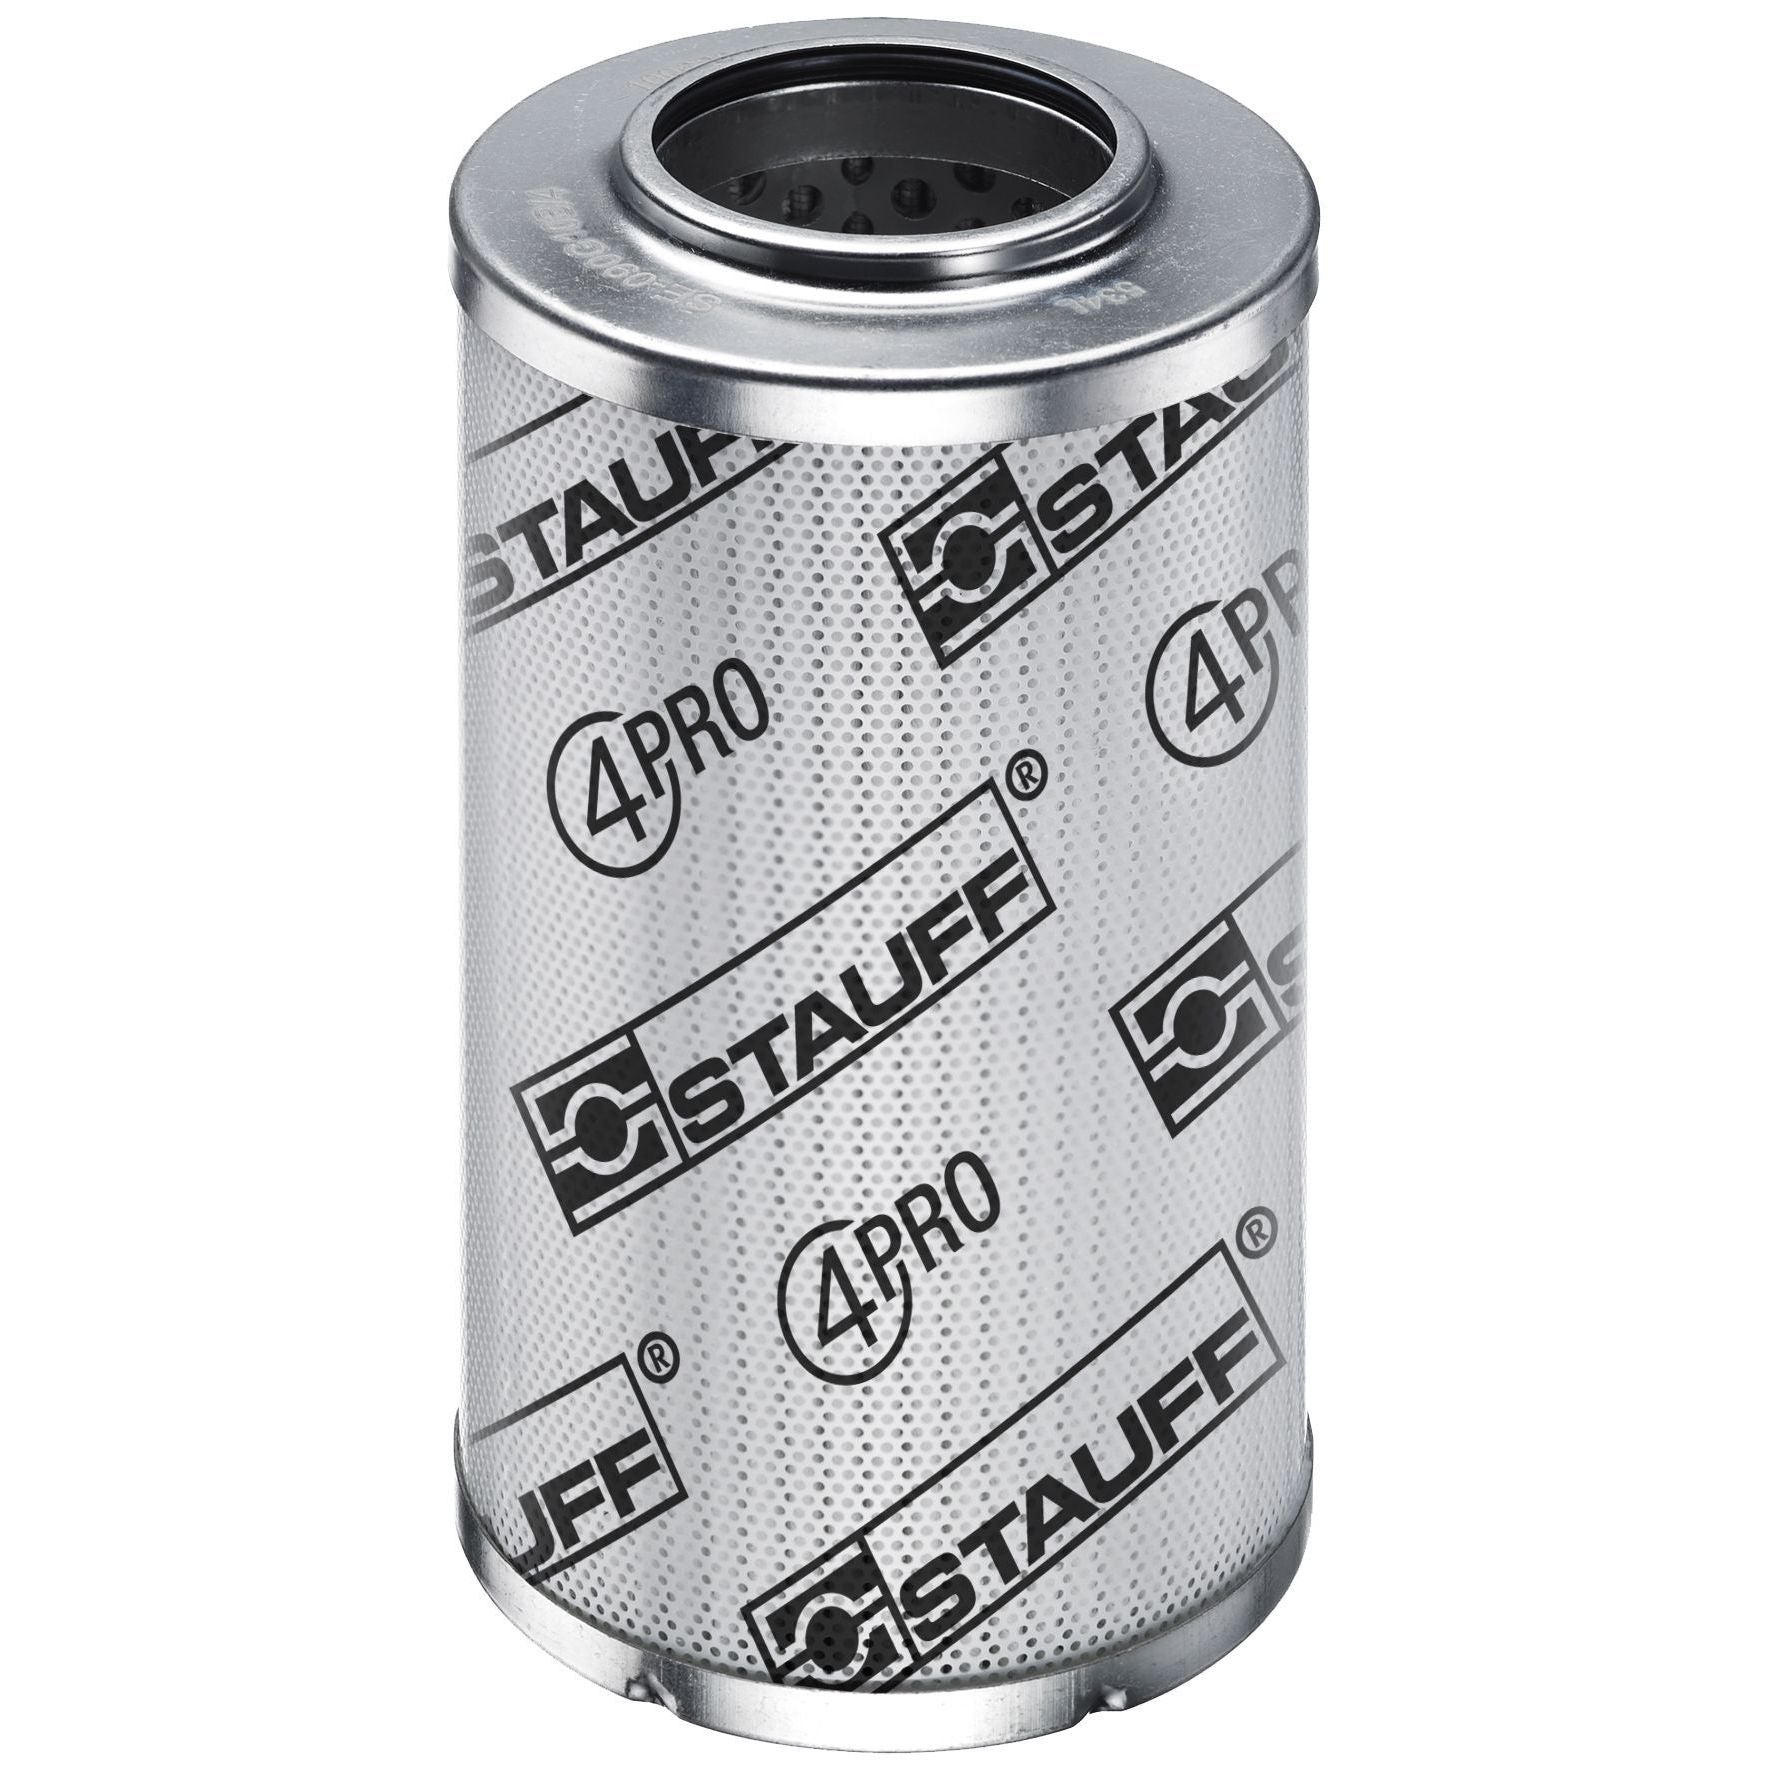 SE-014-G-05-B/4 : Stauff SF-014 Series Filter Element, 5 Micron, Synthetic, 363psi Collapse Differential, Buna